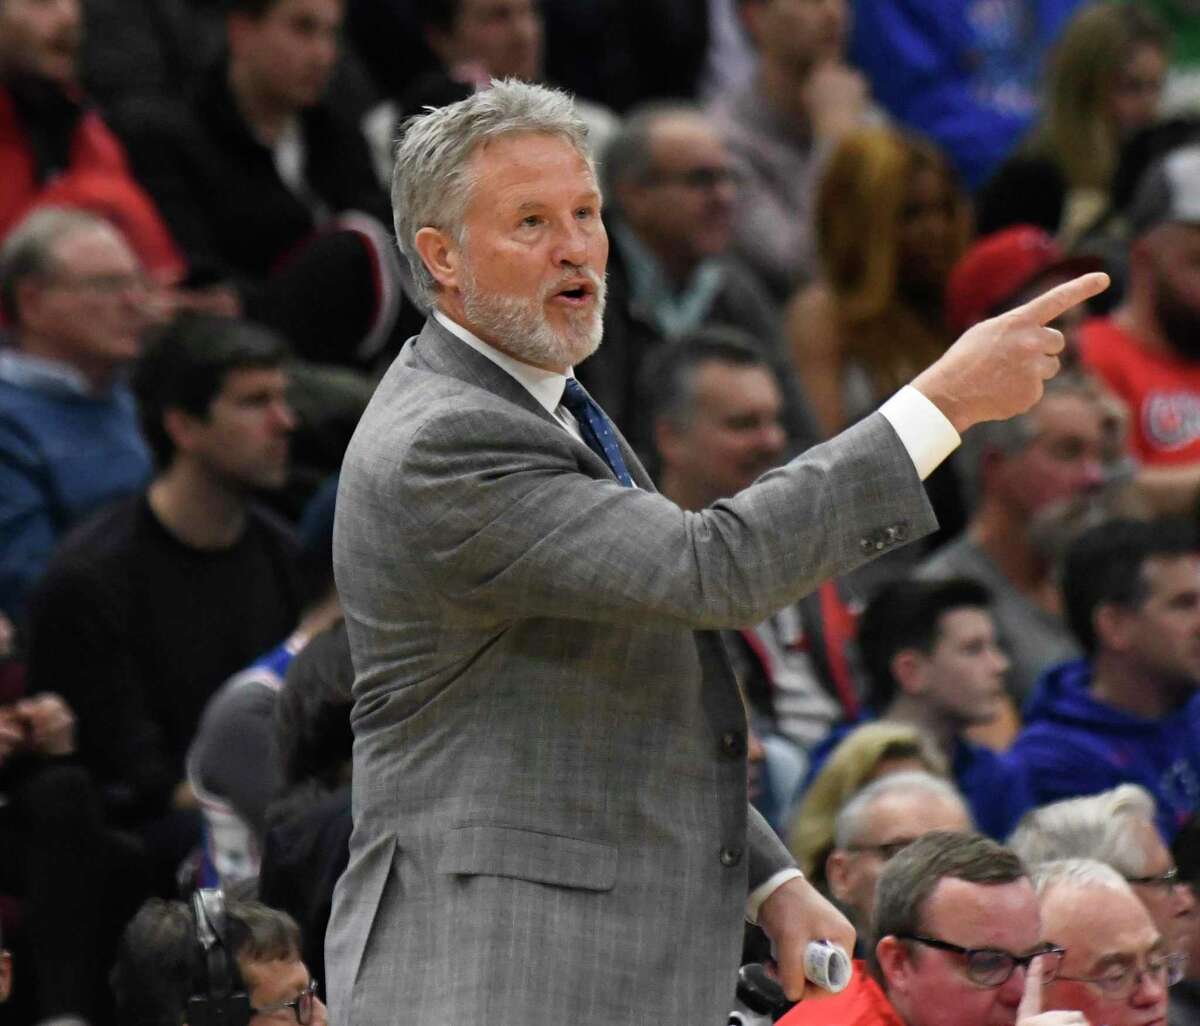 Philadelphia 76ers head coach Brett Brown gestures to his team during the second half of an NBA basketball game Wednesday, March 6, 2019, in Chicago. The Bulls won 108-107. (AP Photo/David Banks)